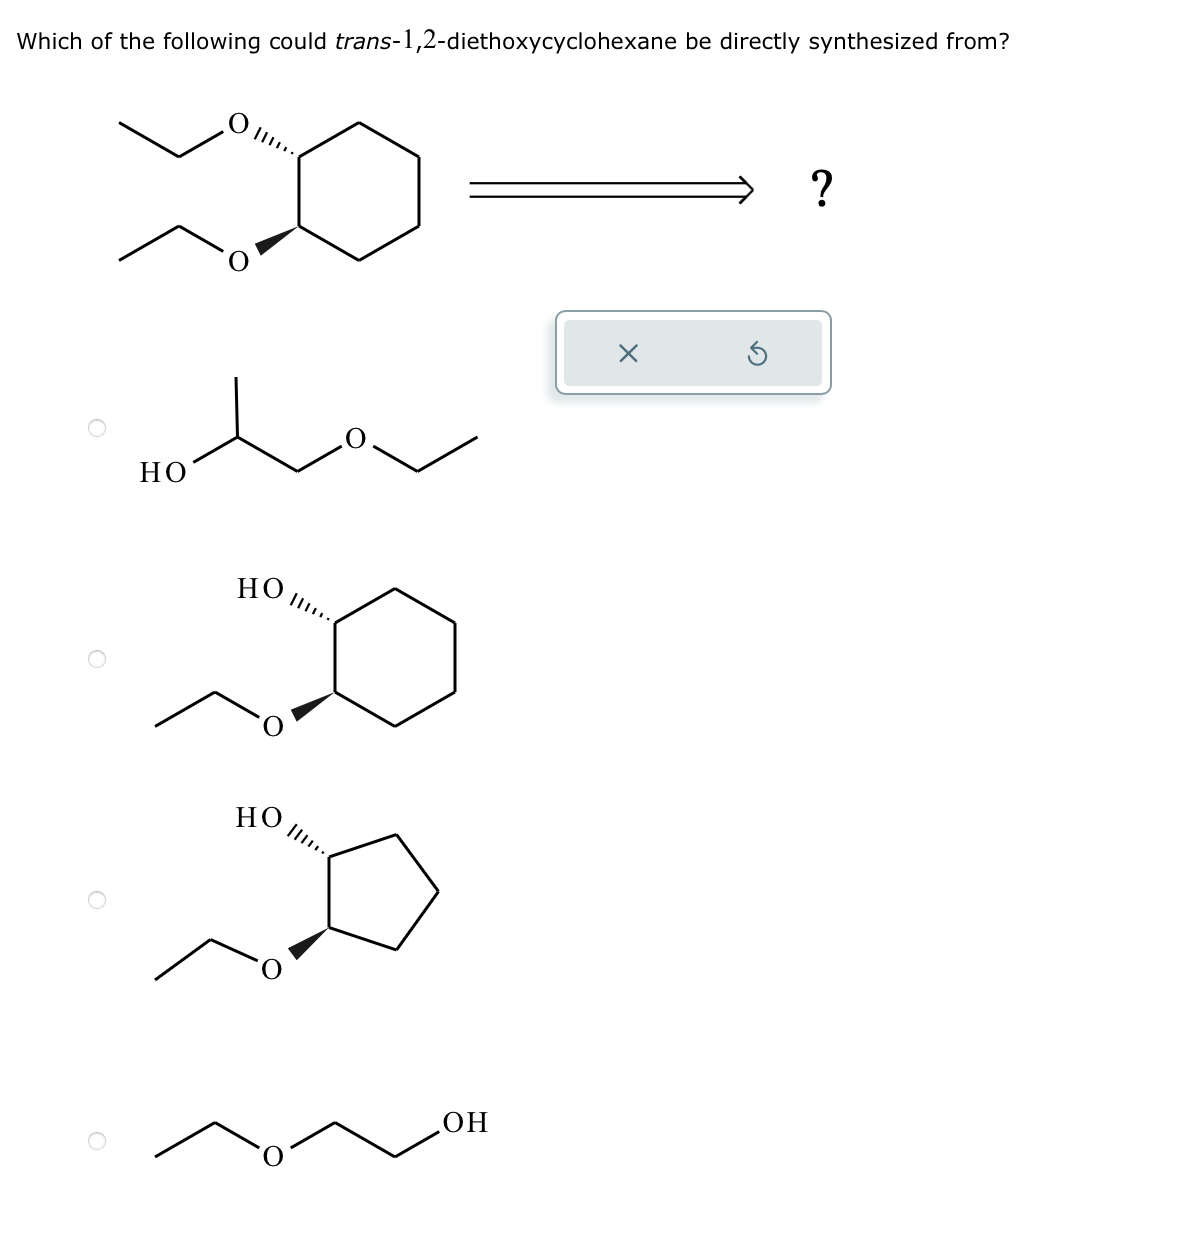 Which of the following could trans-1,2-diethoxycyclohexane be directly synthesized from?
о .....
XO
Но
Но
о
но
"D
ОН
X
?